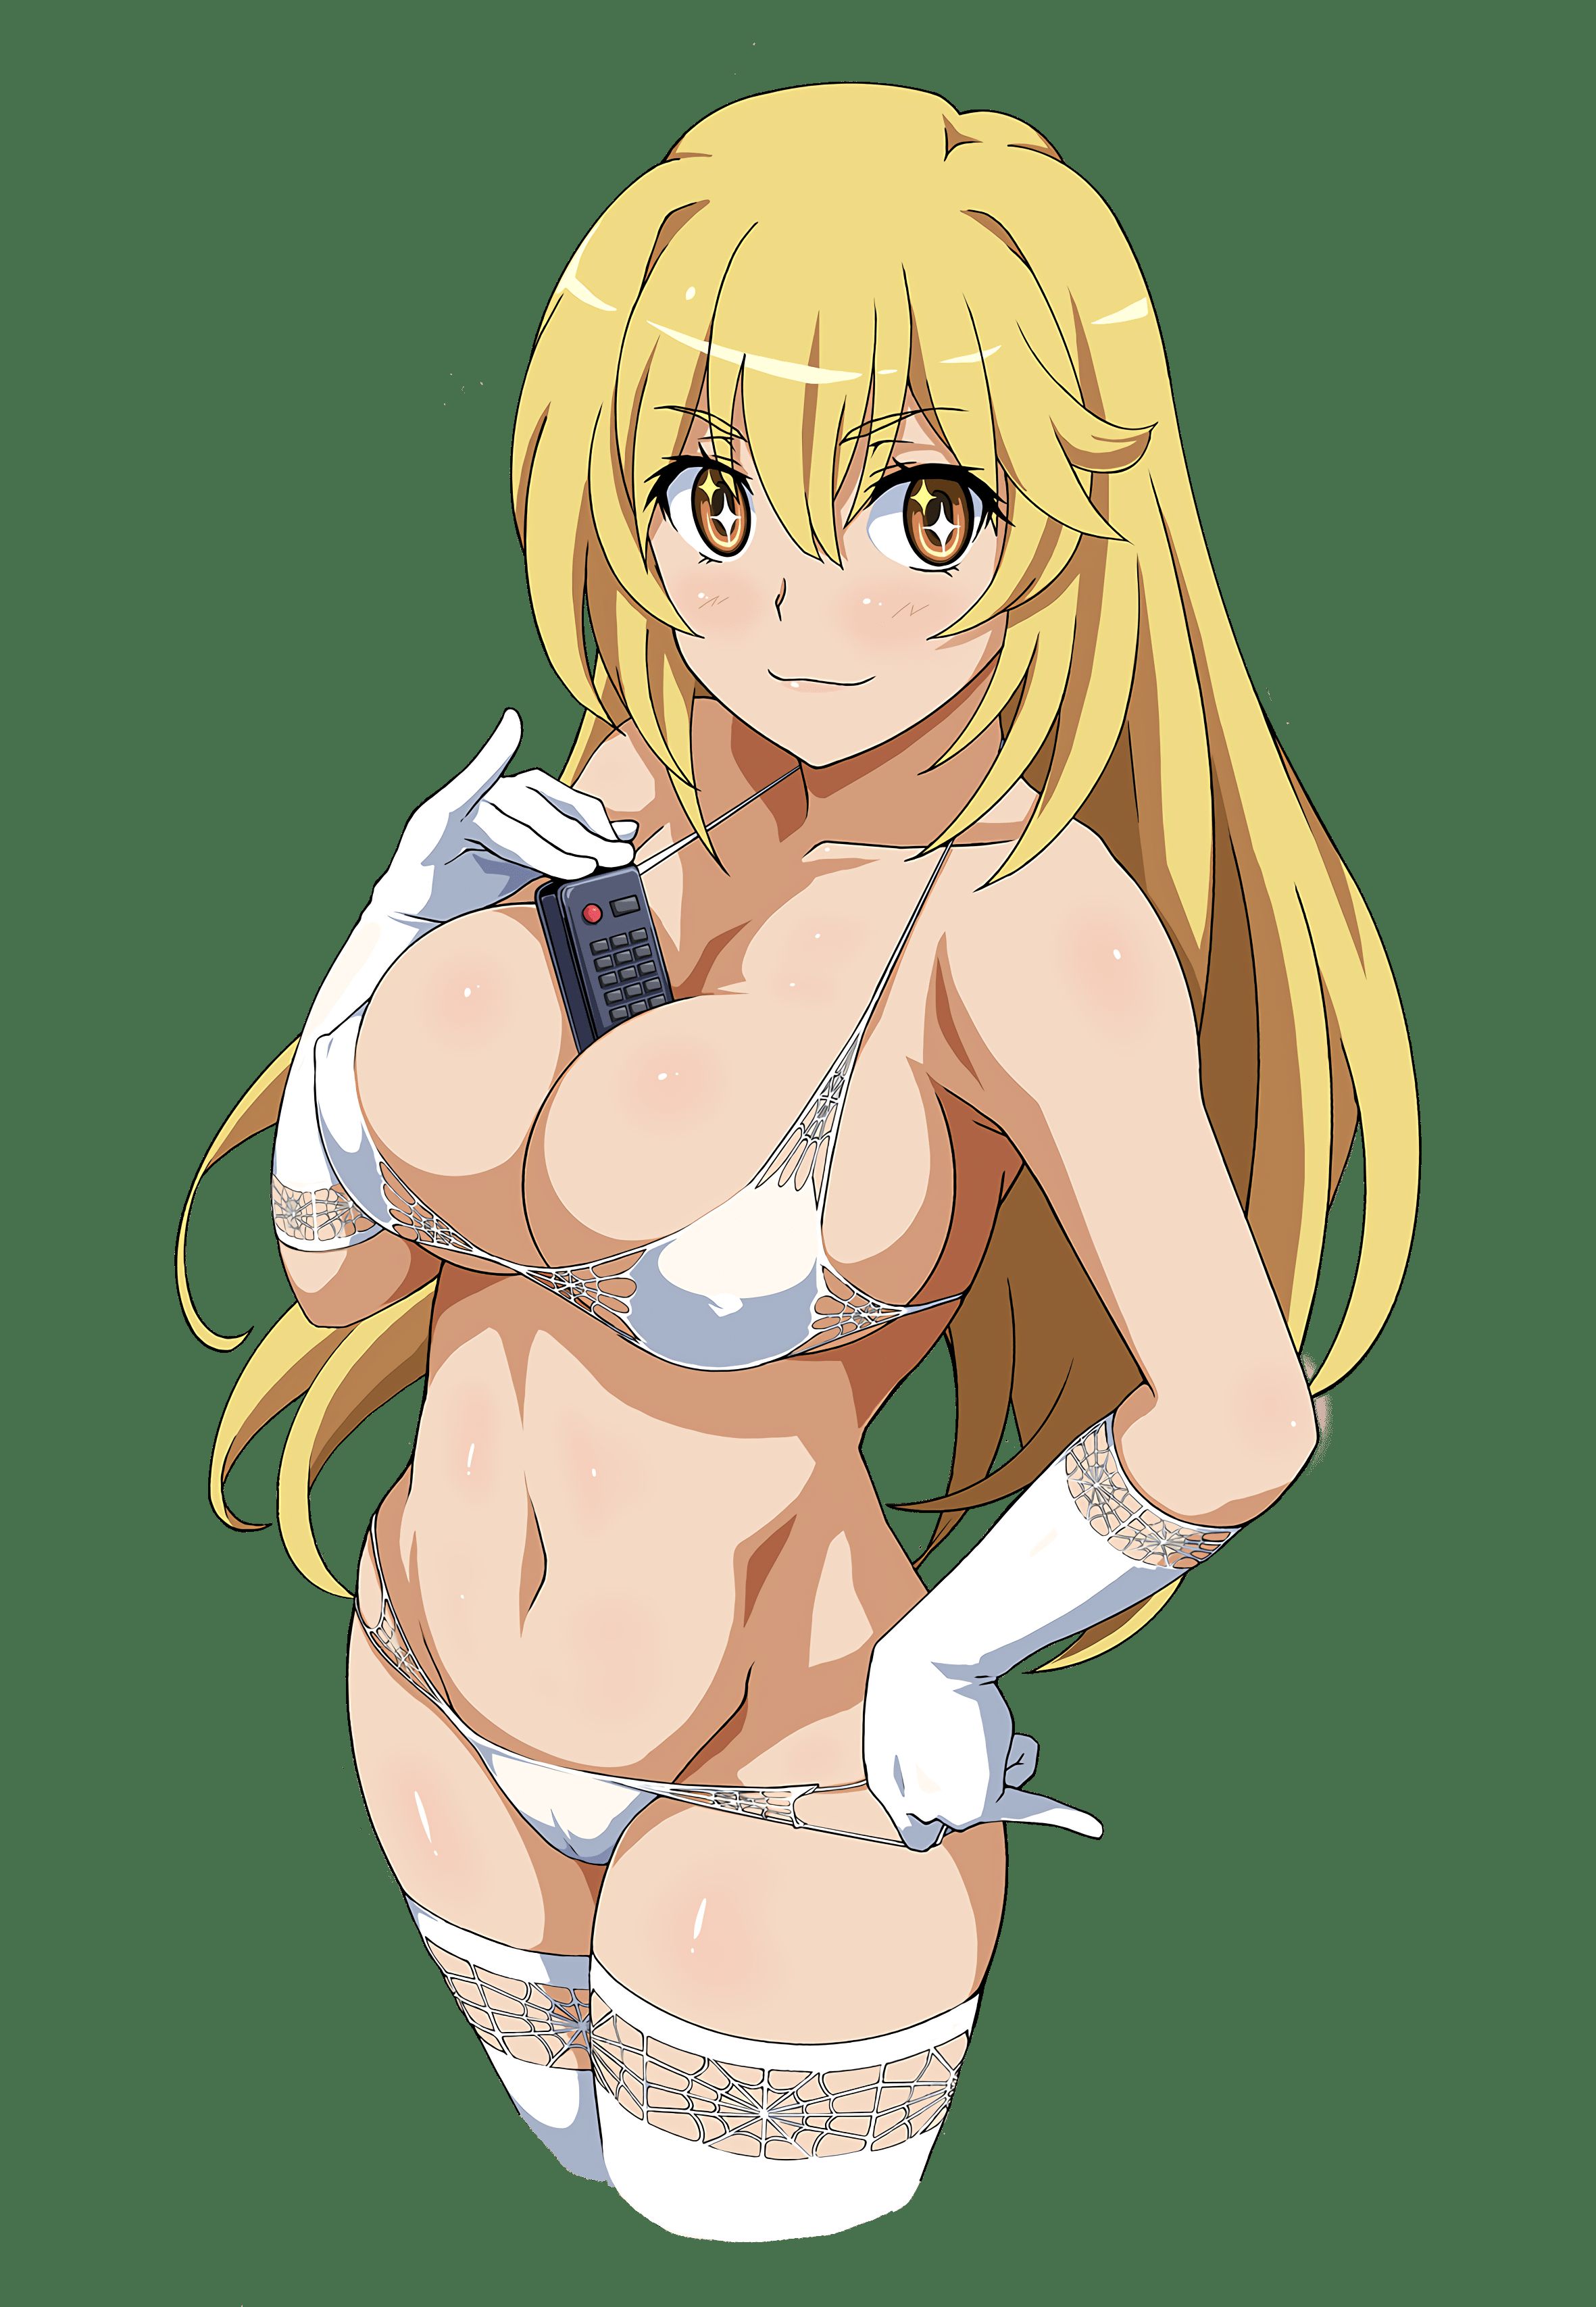 【Erocora Character Material】PNG background transparent erotic image such as anime characters Part 421 23